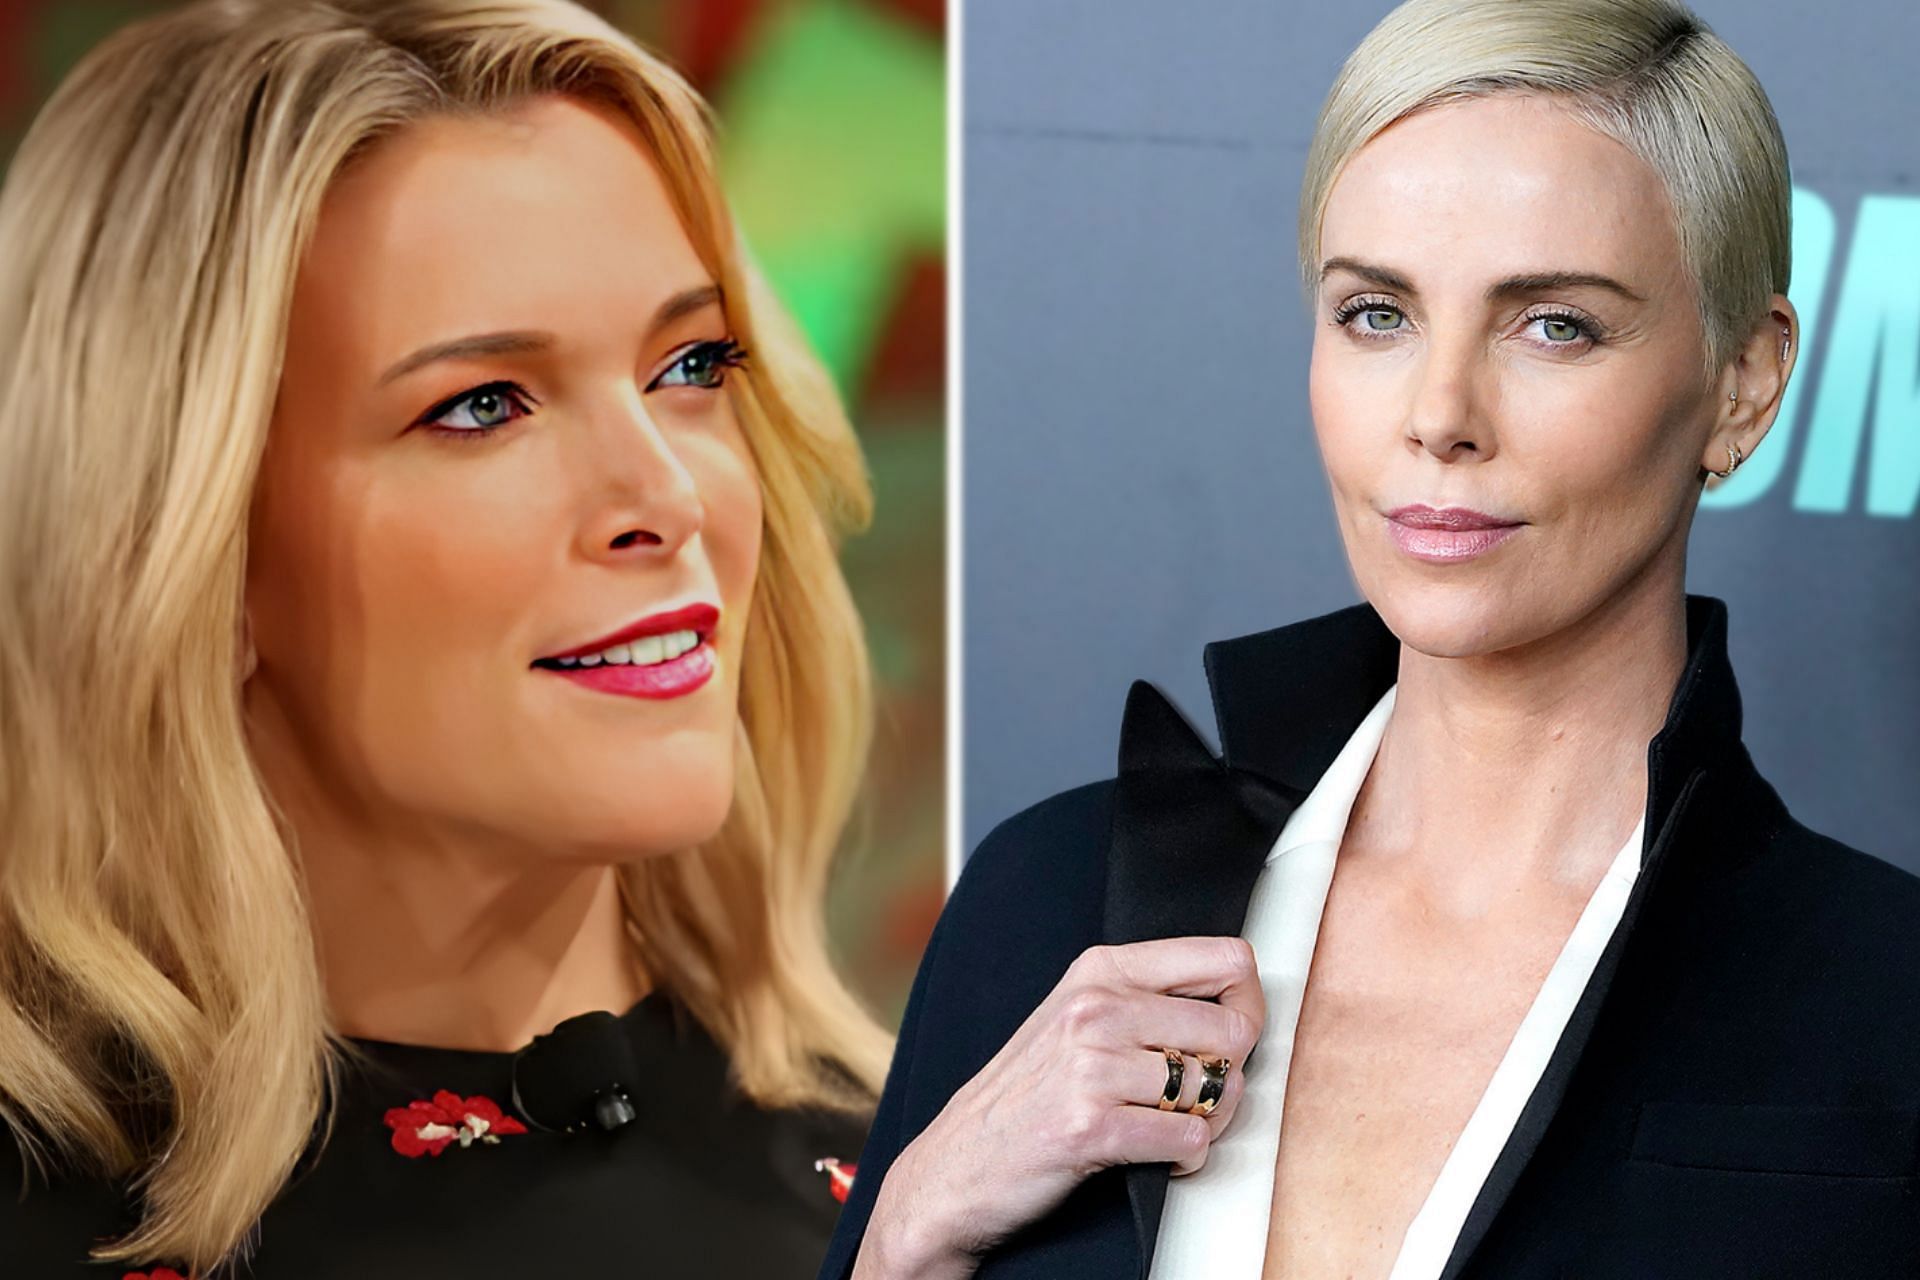 Megyn Kelly criticizes Charlize Theron for her comments at a pro-drag queen telethon (Image via Phillip Faraone/Getty Images &amp; John Lamparski/Getty Images)